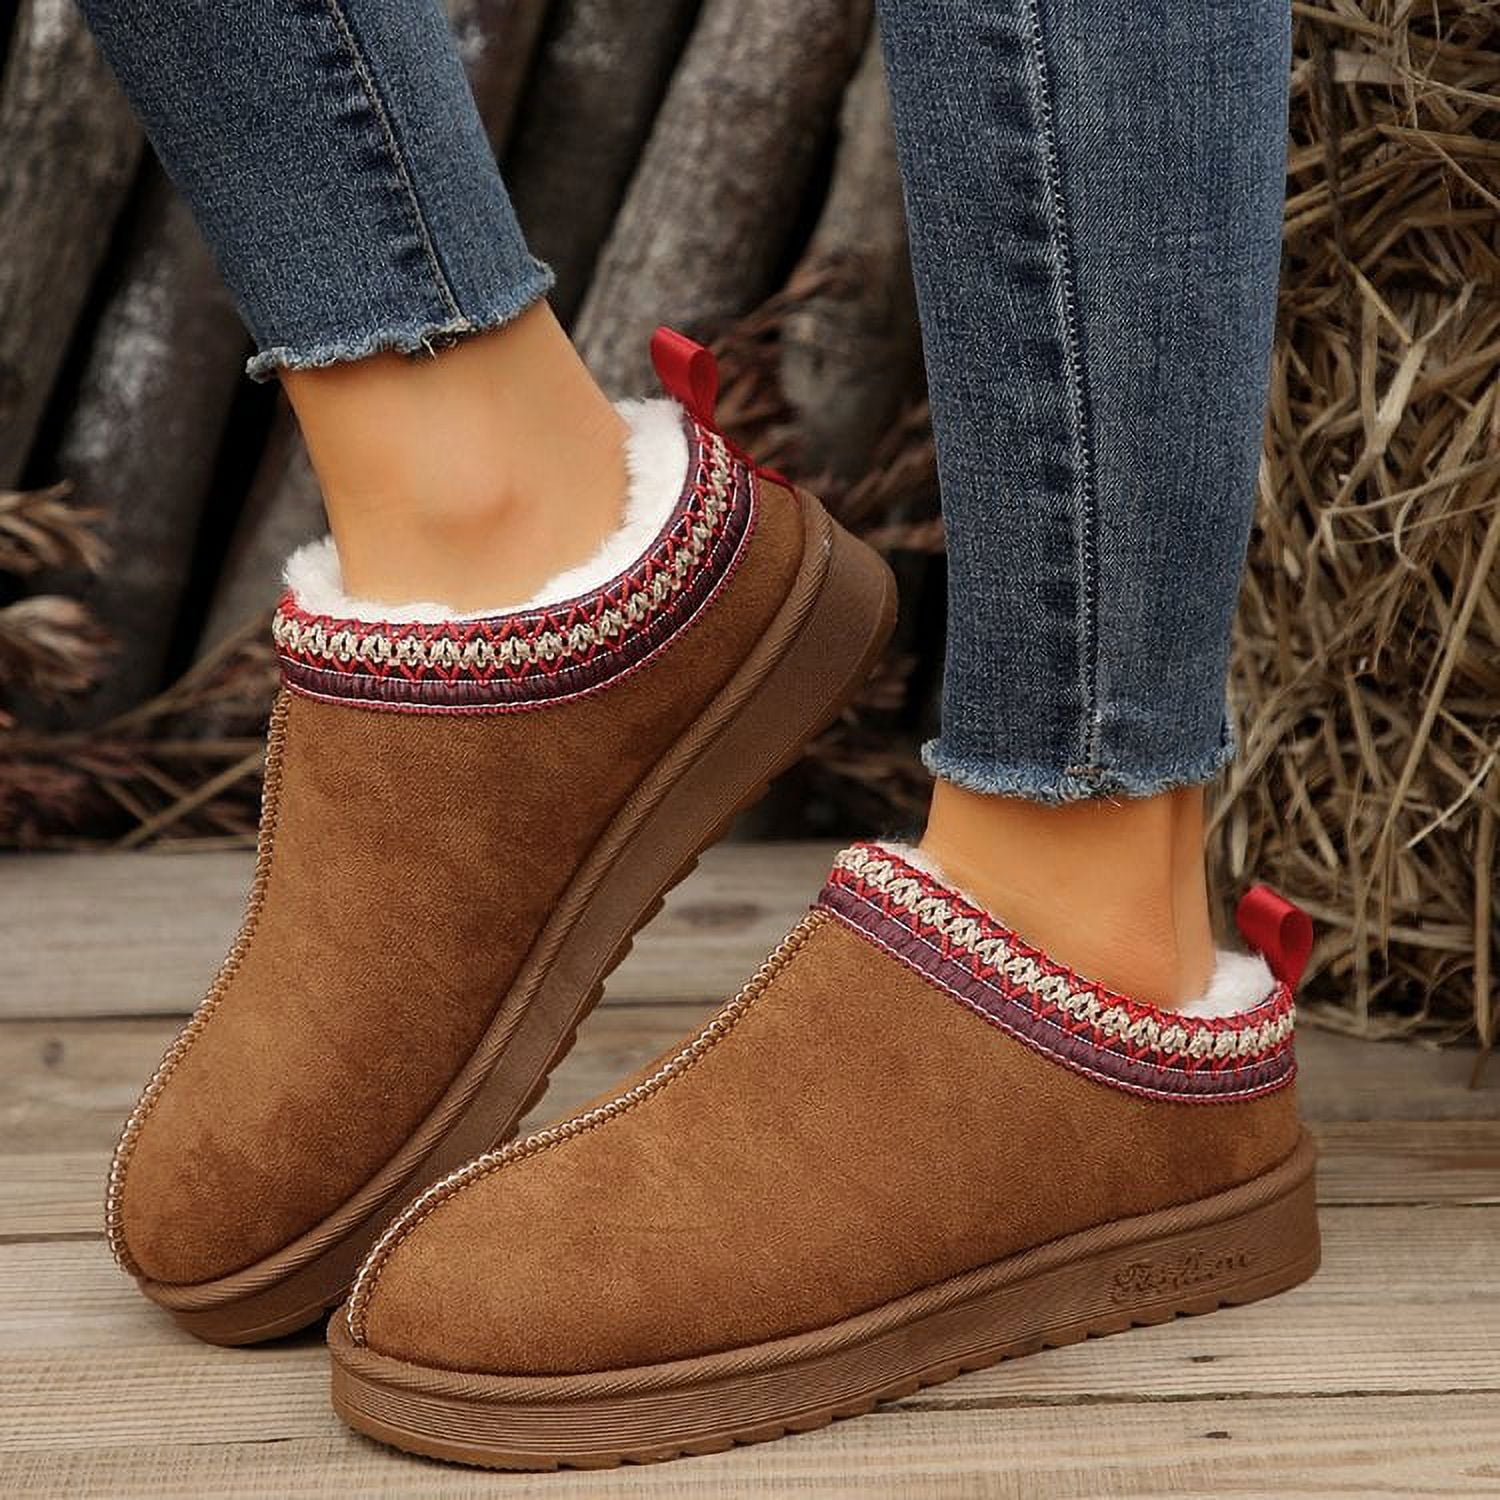 Women's Slippers Platform Mini Boots Short Ankle Boot Fur Fleece Lined  Sneakers House slippers Anti-Slip Boot For Outdoor